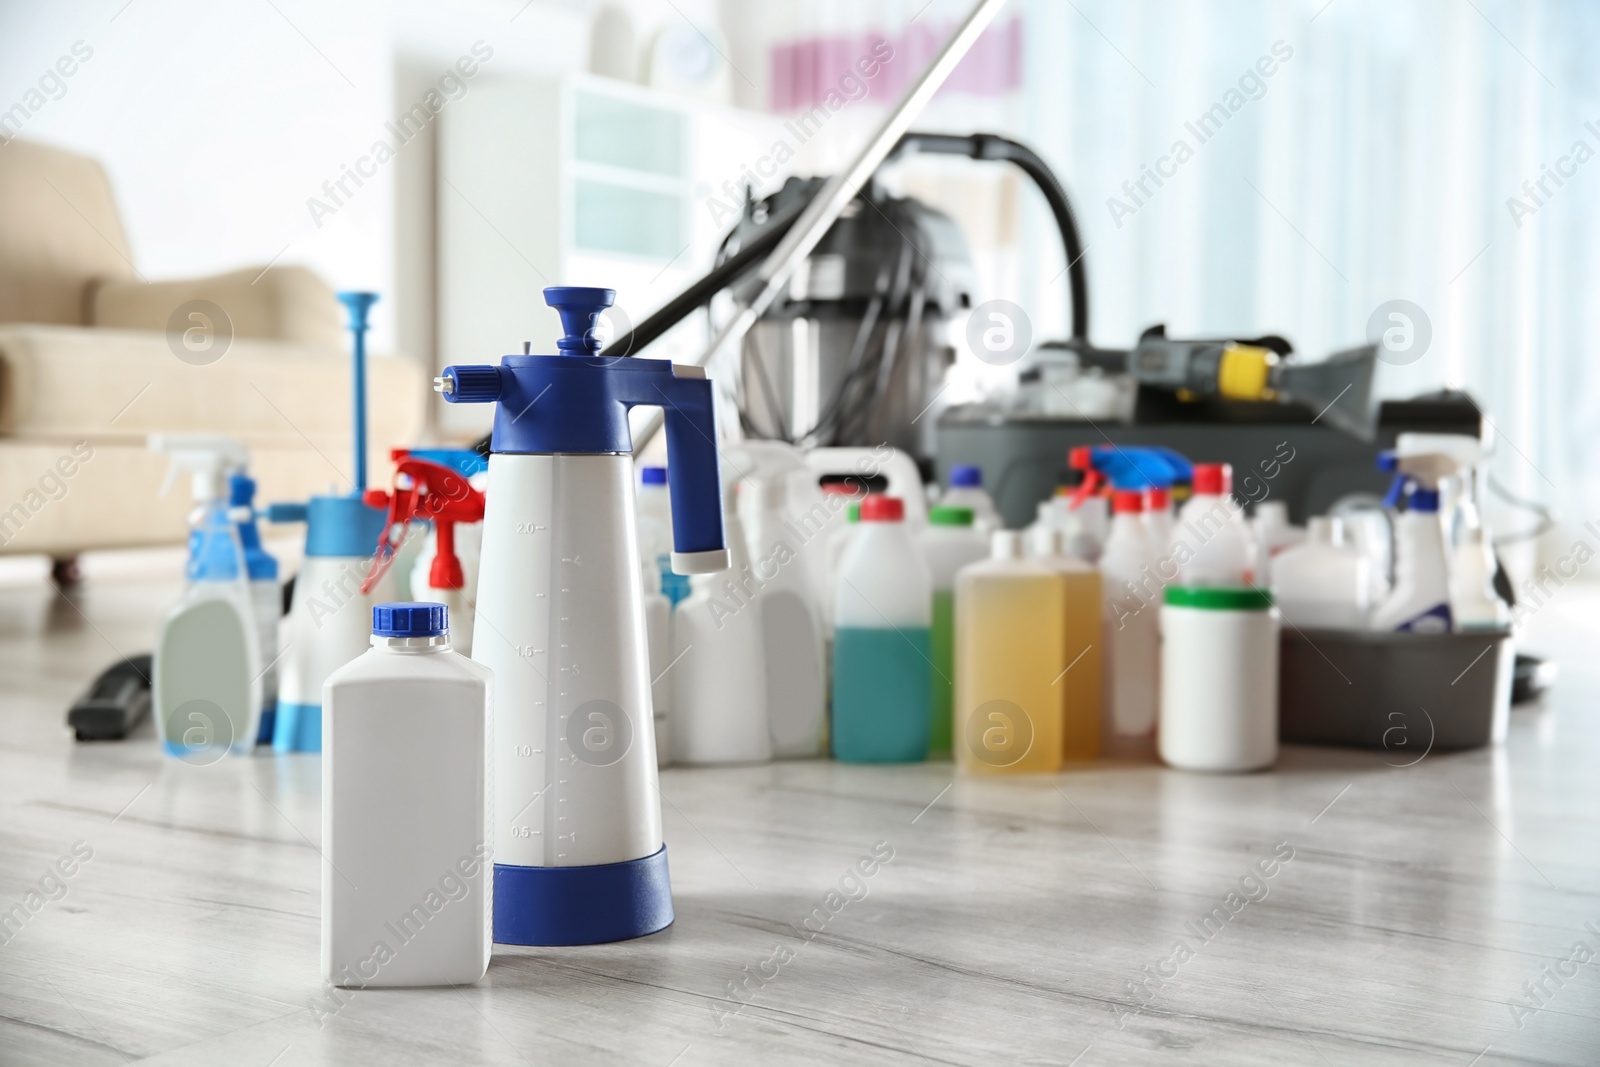 Photo of Professional cleaning supplies and equipment on floor indoors. Space for text